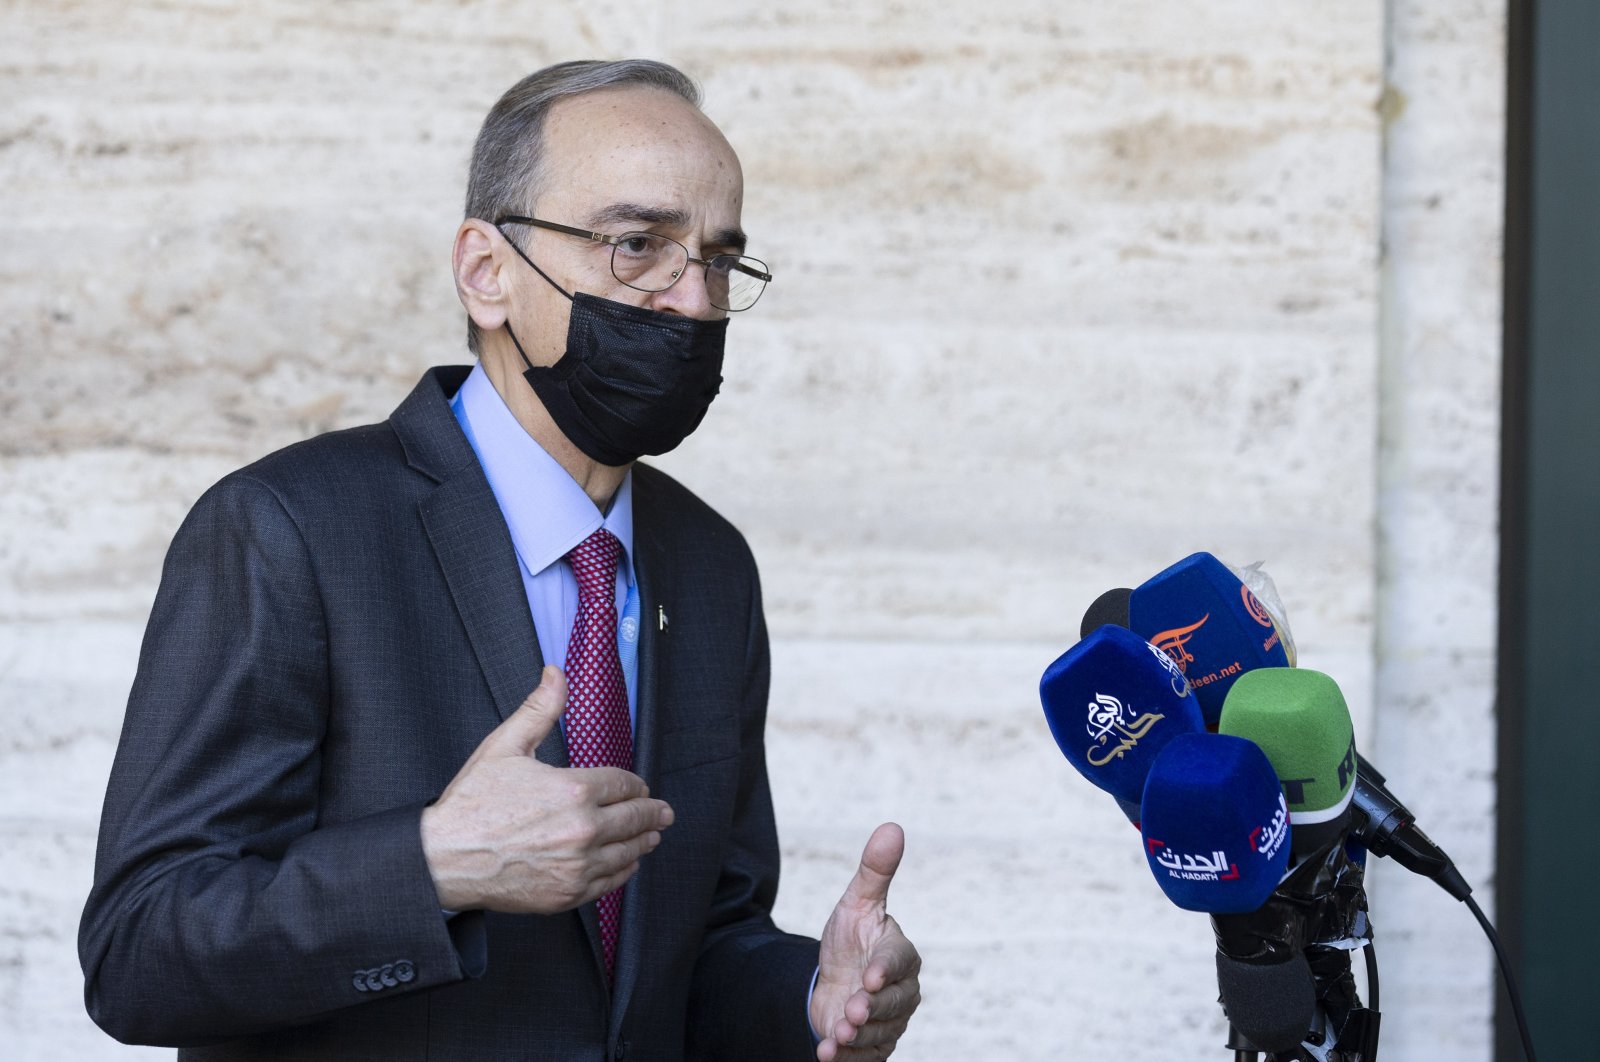 Constitutional Committee co-Chair Hadi al-Bahra speaks to reporters following the announcement of the suspension of the conference due to cases of COVID-19, at the European headquarters of the United Nations in Geneva, Switzerland, Aug. 24, 2020. (AP Photo)